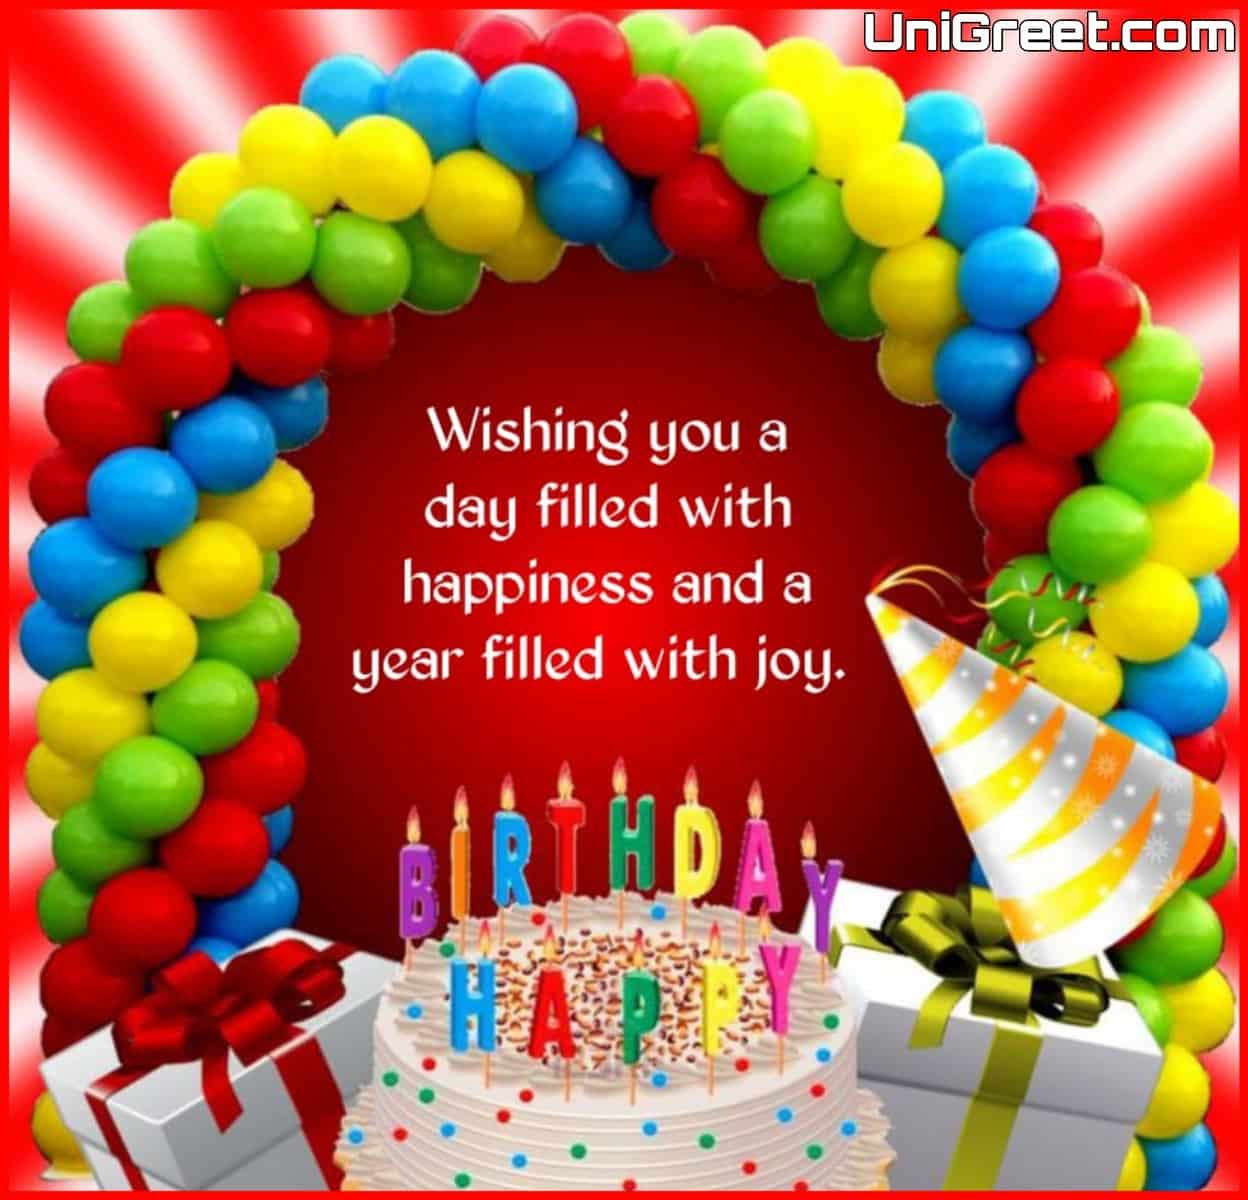 Top 999+ birthday images download – Amazing Collection birthday images download Full 4K